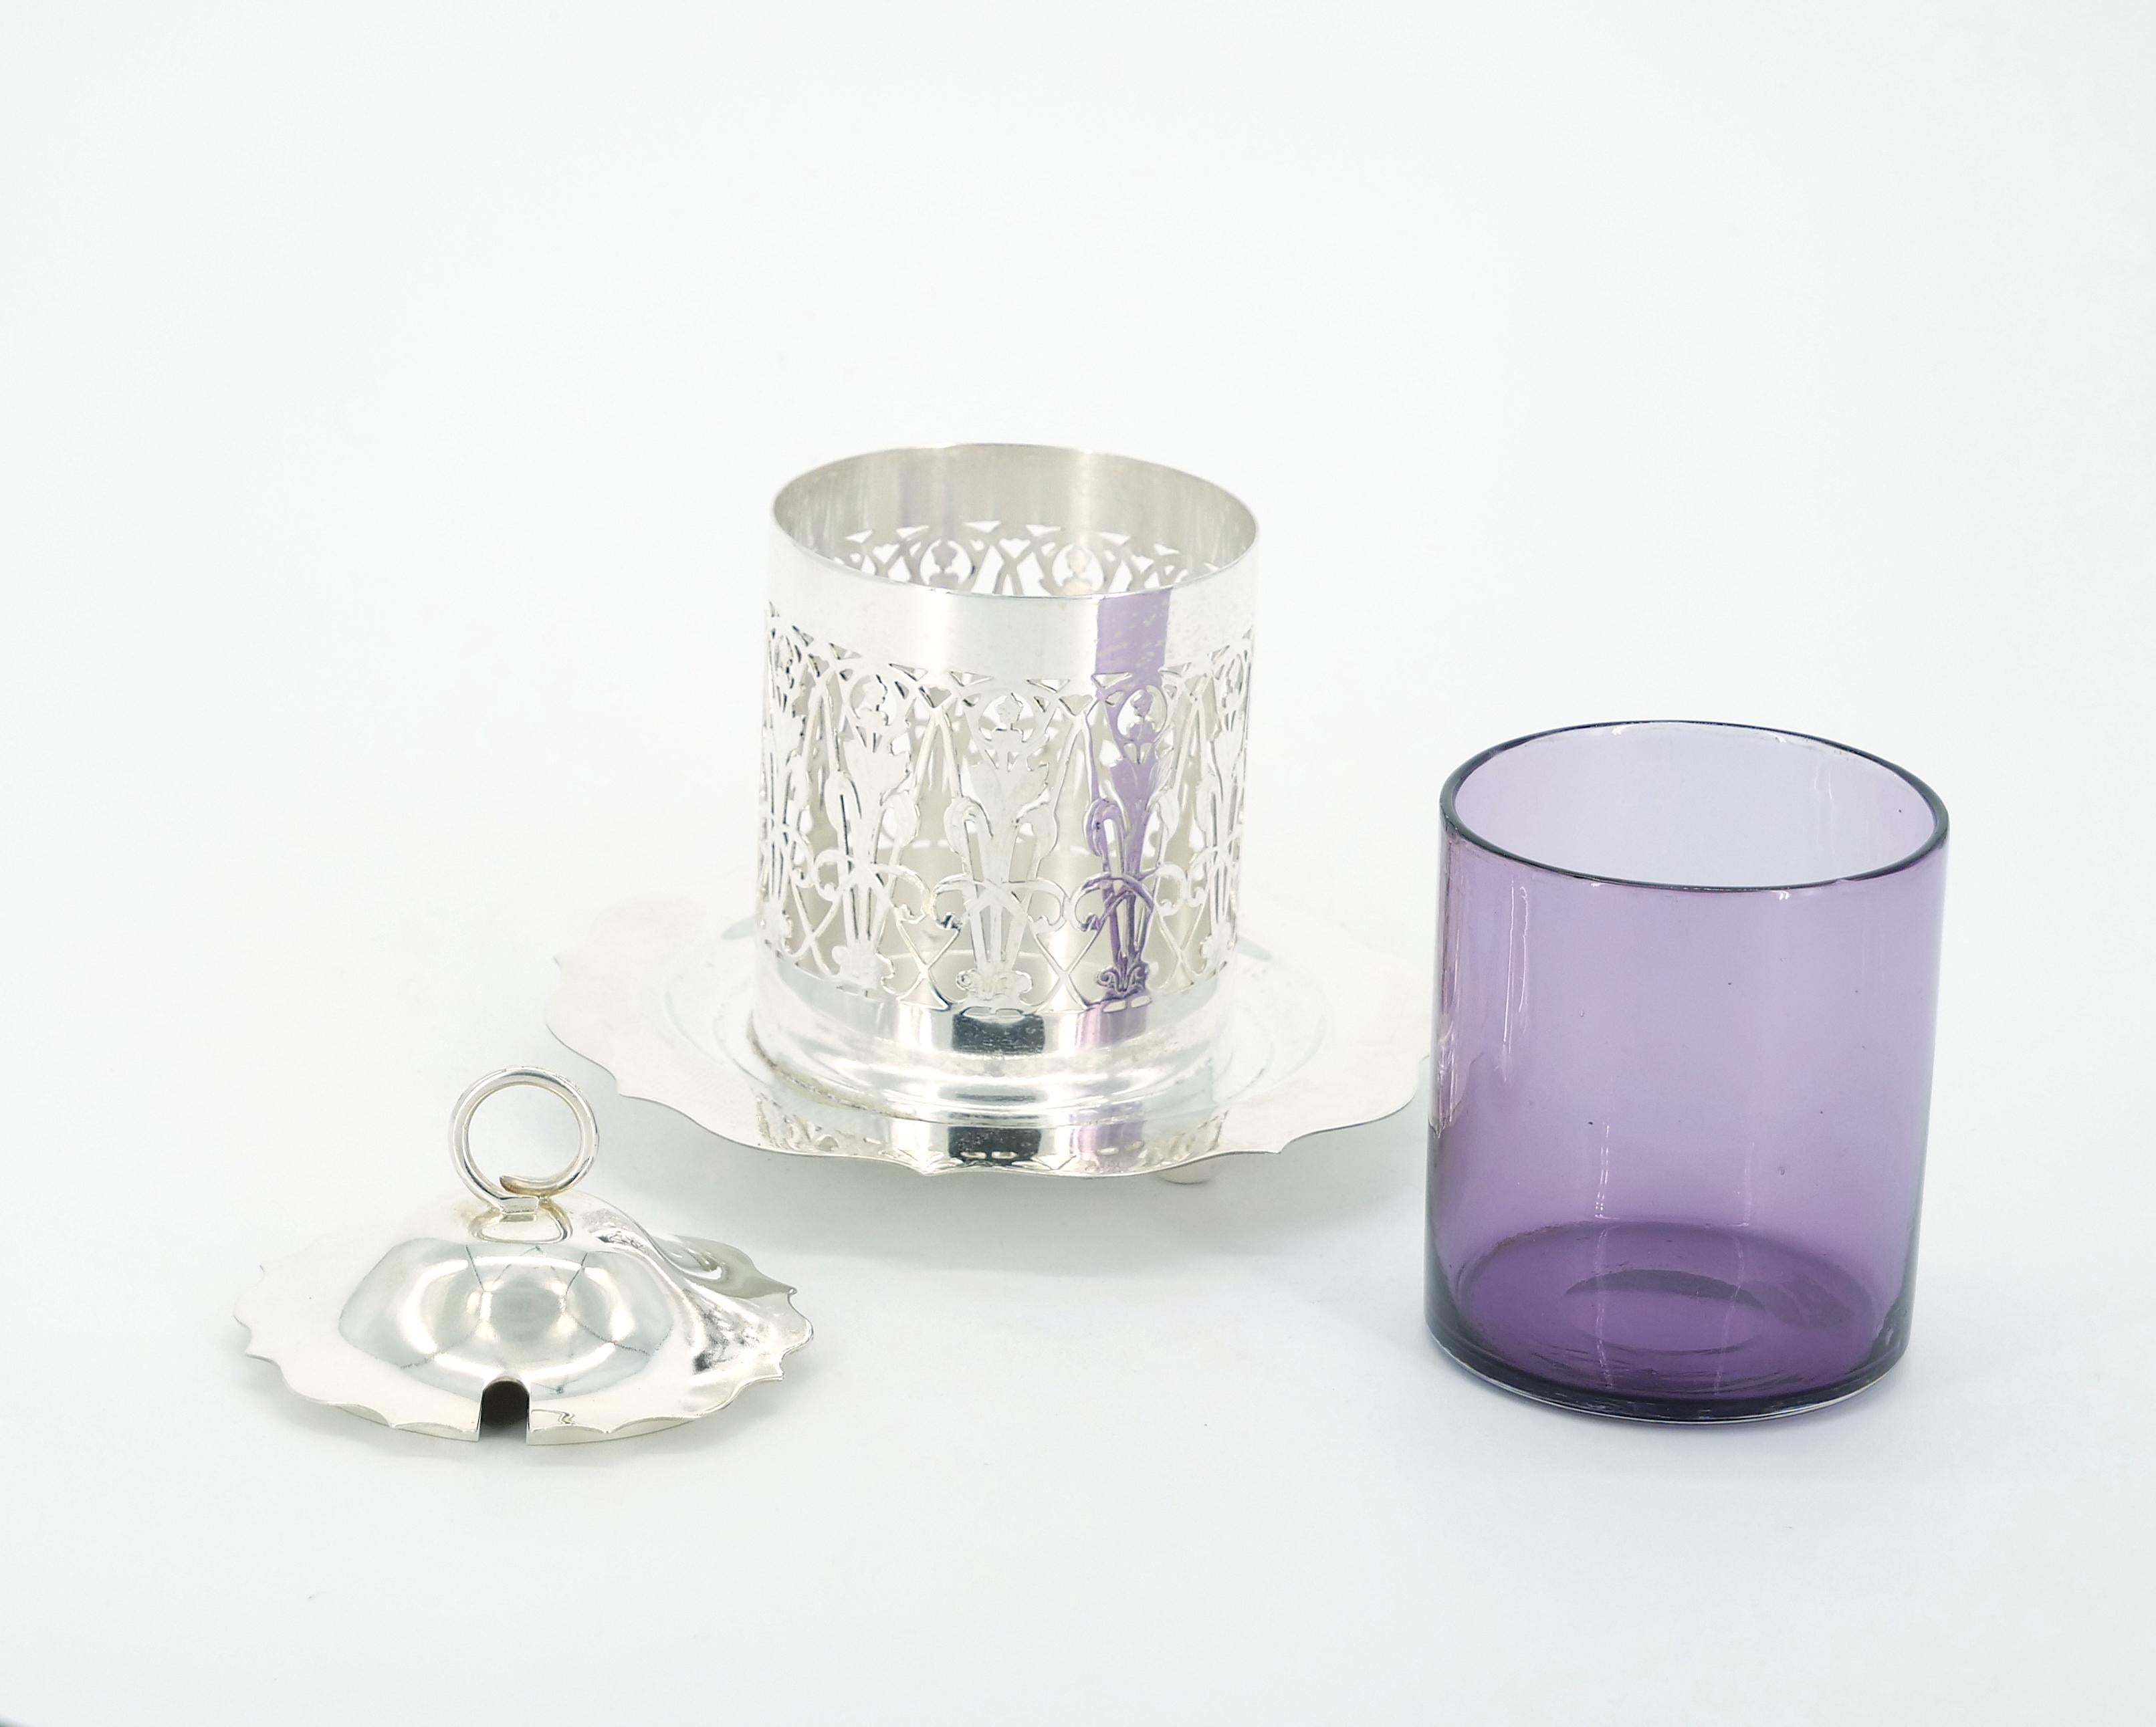 Introduce an air of refined elegance to your dining experience with our Early 20th Century English Silver-Plated Holding Base/Purple Glass Insert Tableware Covered Jar. This exquisite condiment piece seamlessly blends vintage charm with functional